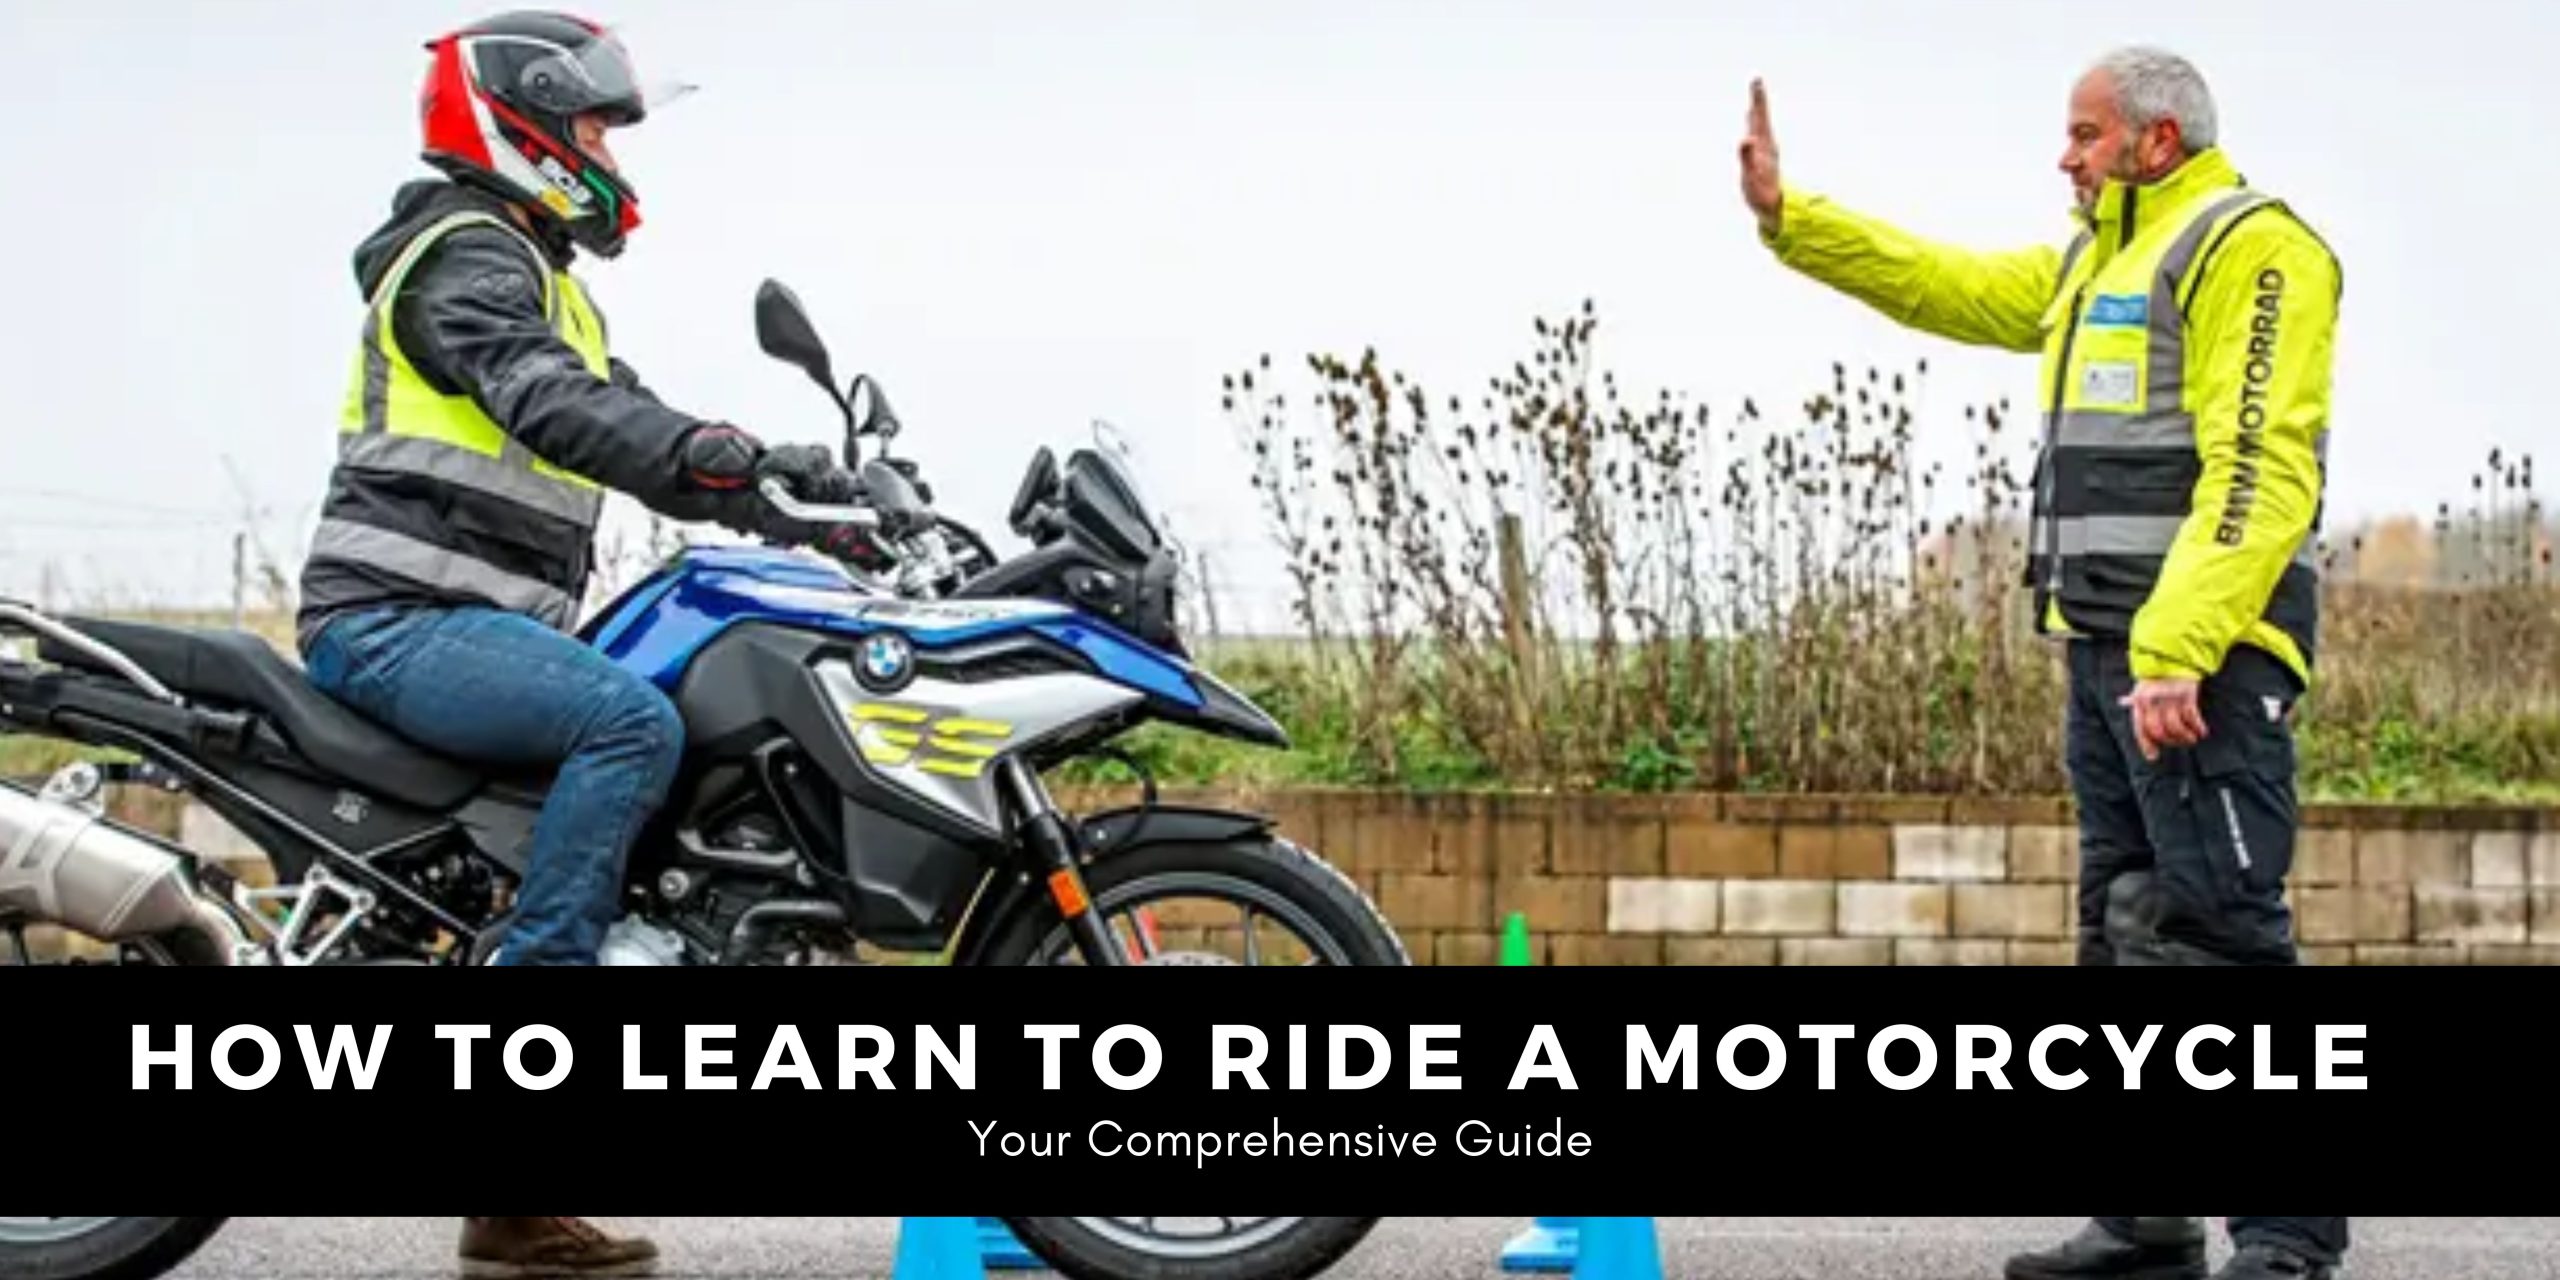 How to Learn to Ride a Motorcycle